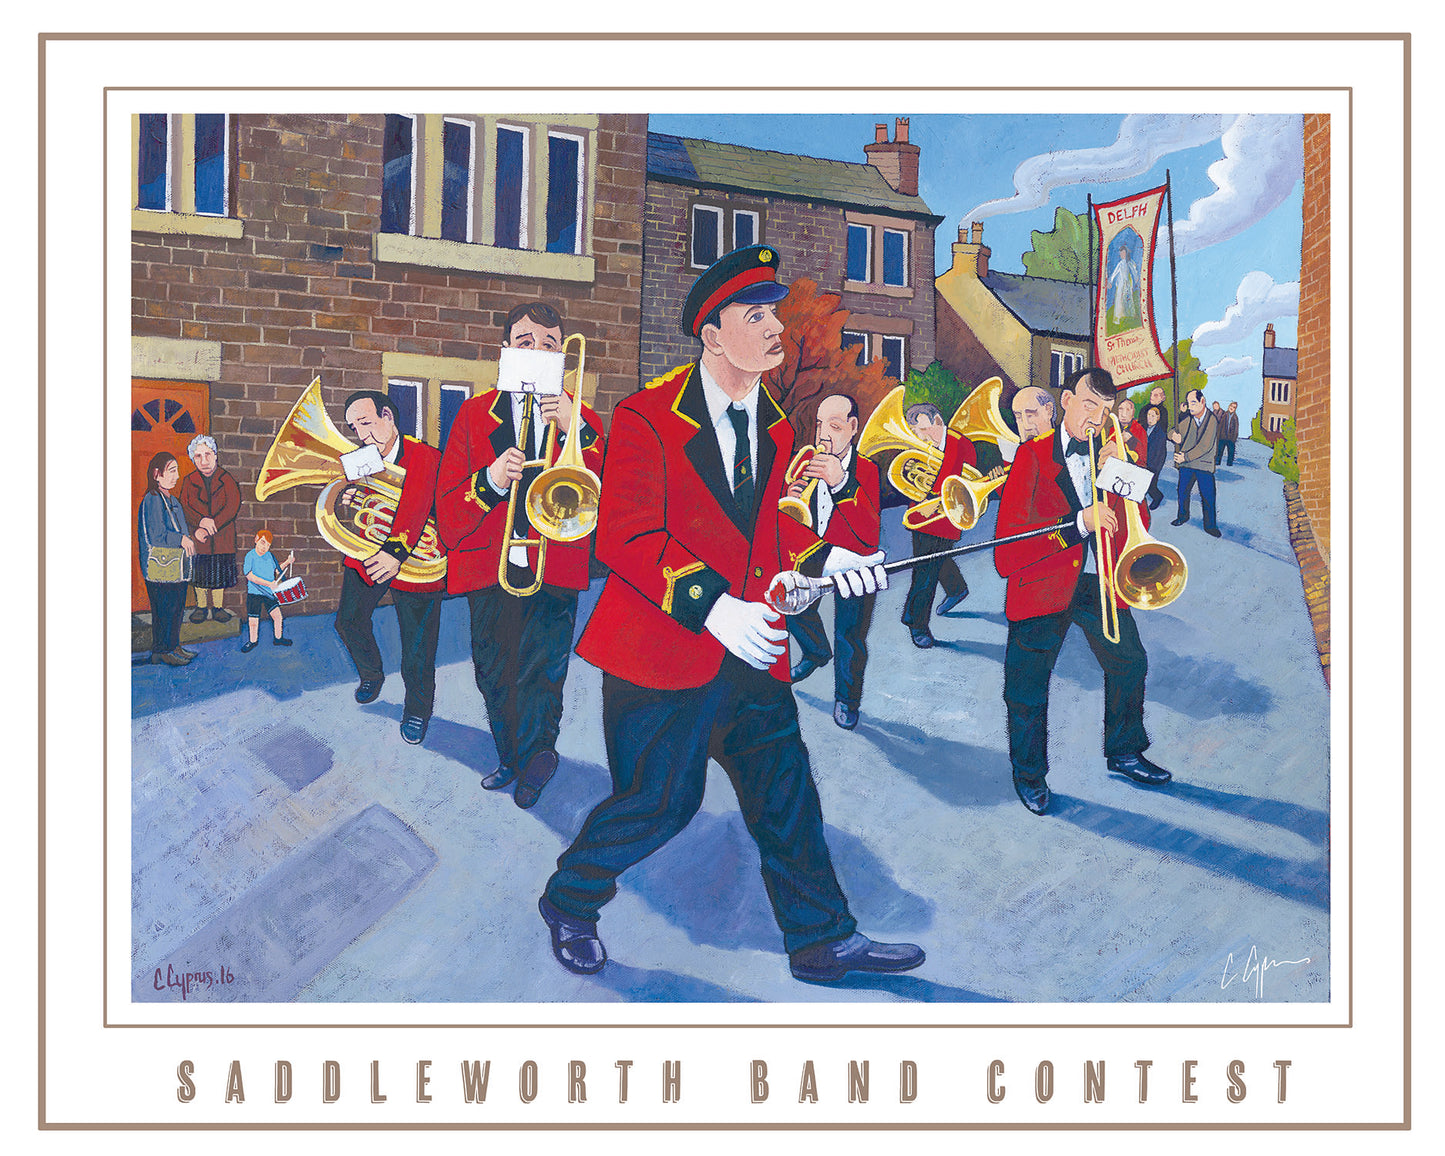  A parade of brass at the famous Whit Friday celebrations in saddleworth, Oldham.  Reproduced from my original painting 'the reds go marching' 2016          A2 size         Printed on 250gsm silk board paper - sustainably sourced         Tube rolled ideal for worldwide shipping